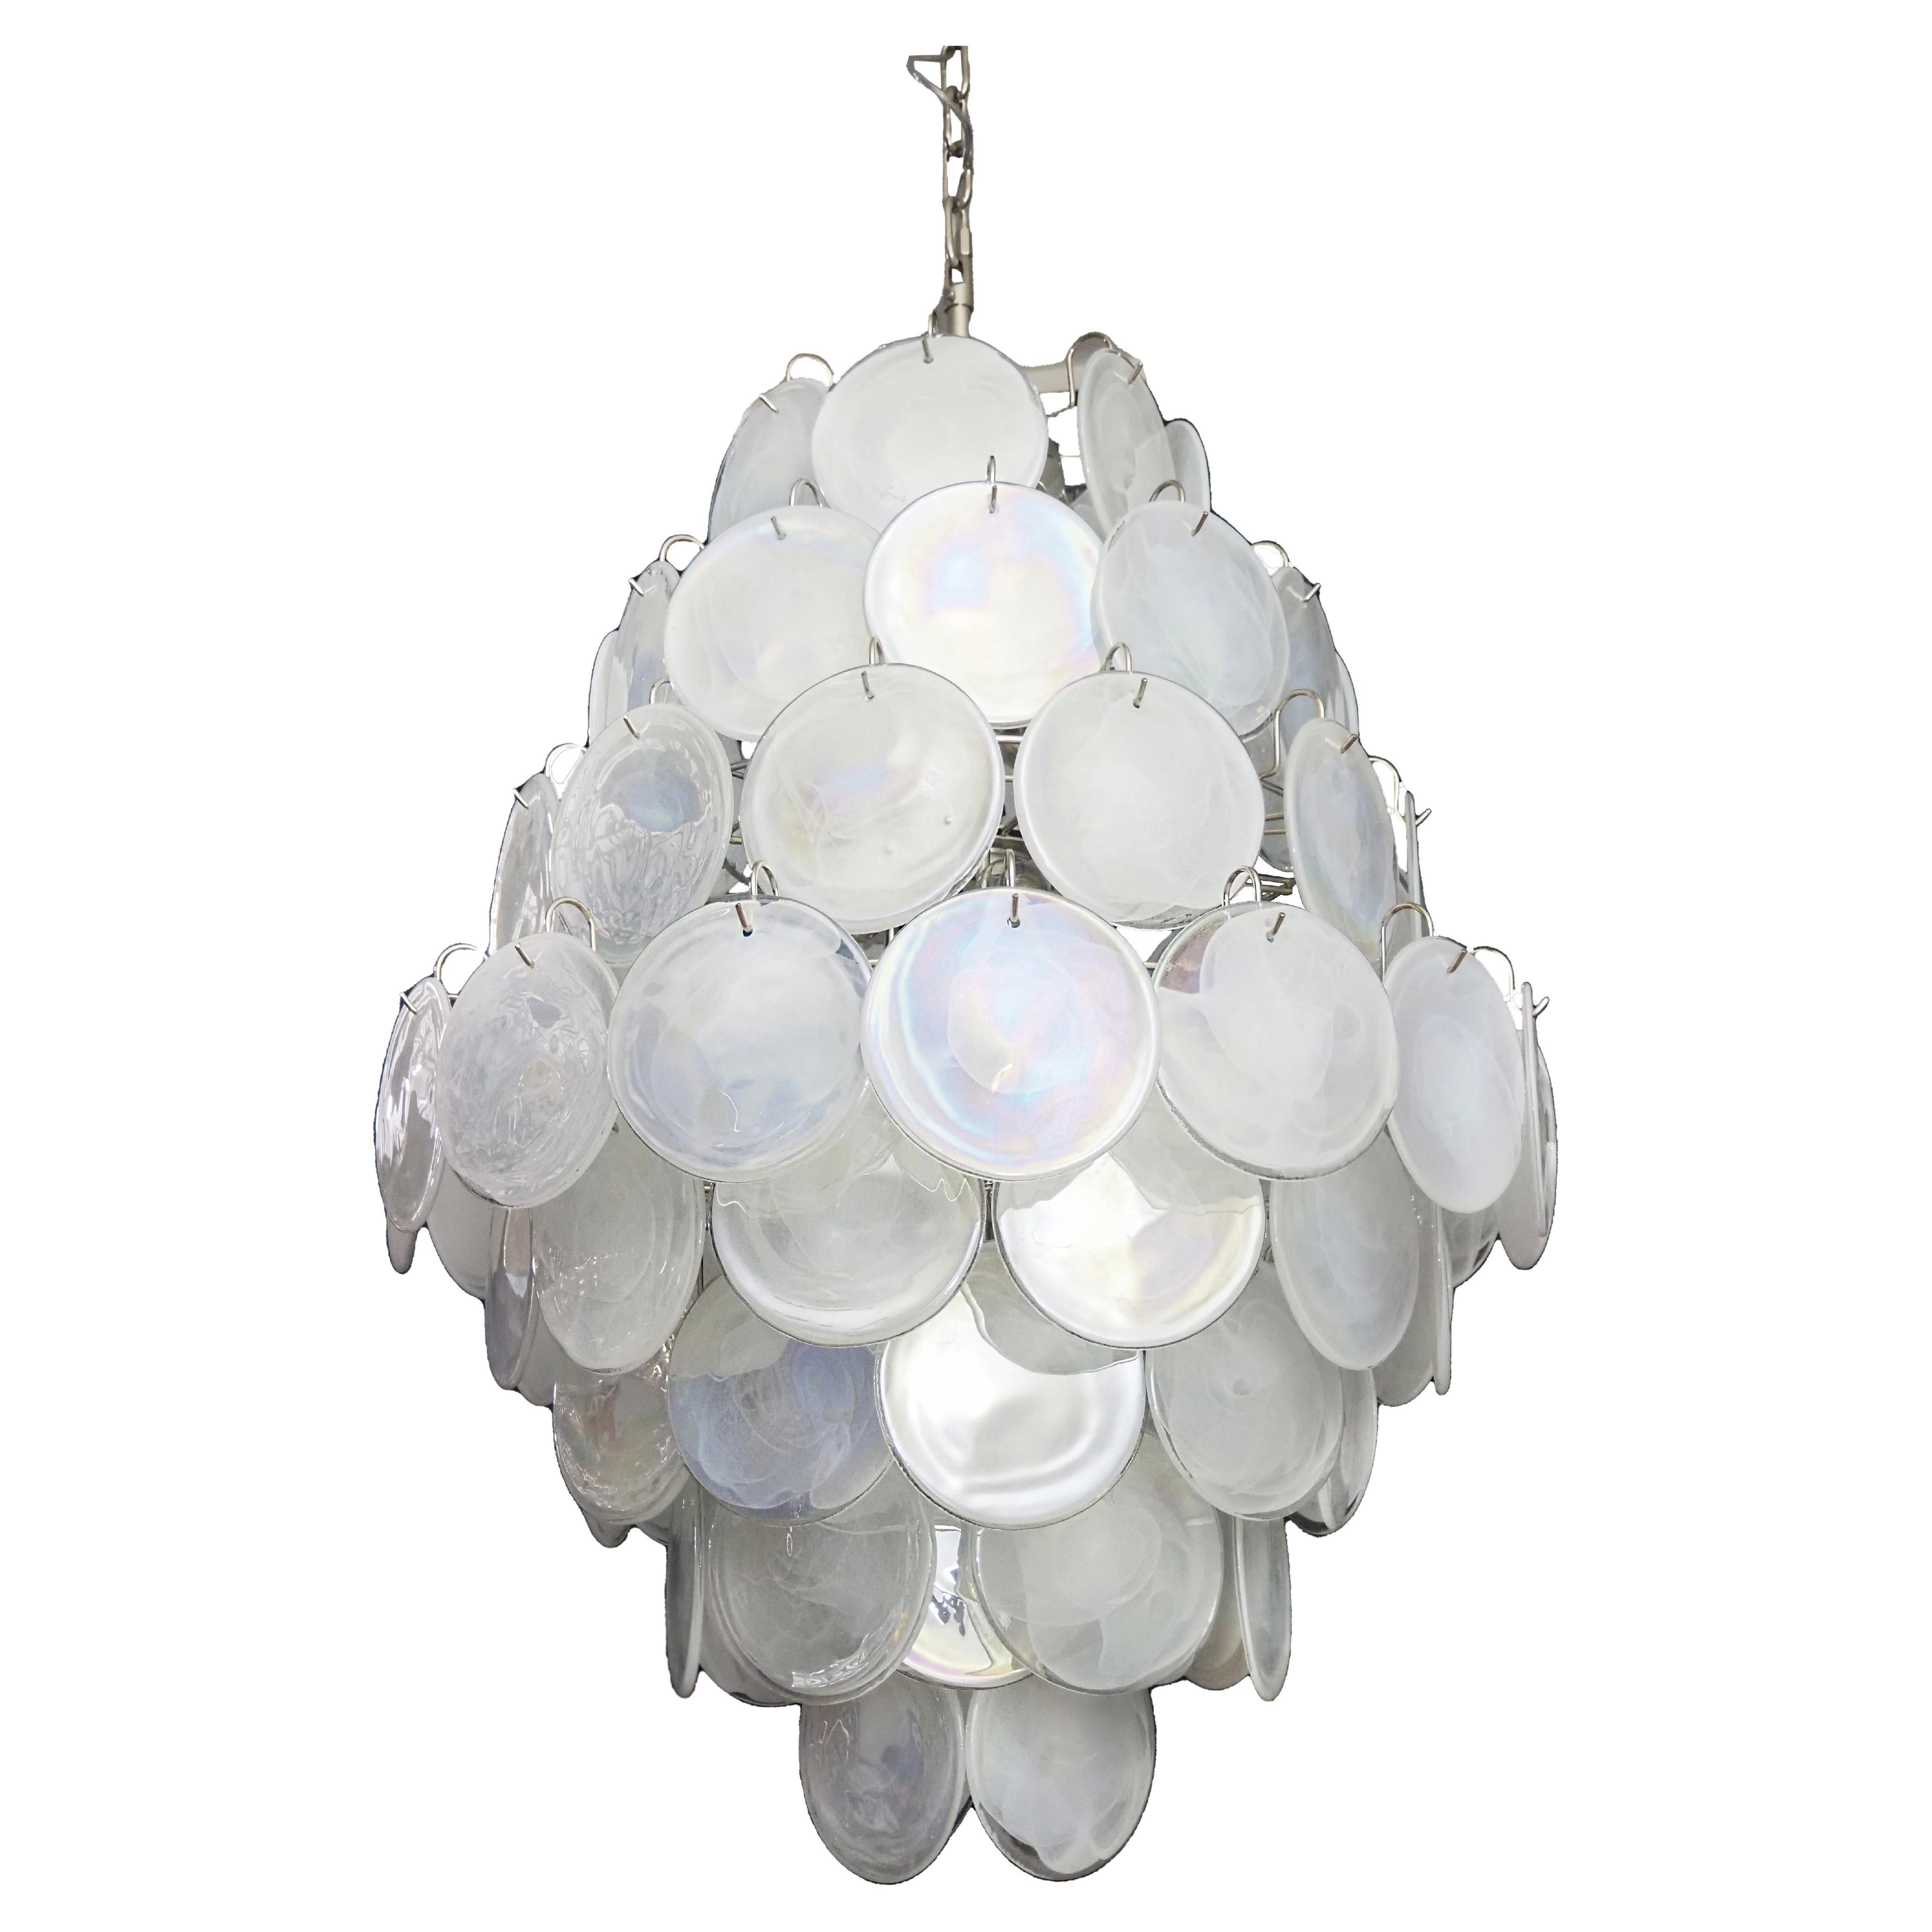 Vintage Italian Murano chandelier in Vistosi style. The chandelier has 87 fantastic white alabaster iridescent glasses in a nickel metal frame.
Period: late XX century
Dimensions: 67,80 inches (175 cm) height with chain; 40,70 inches (105 cm) height